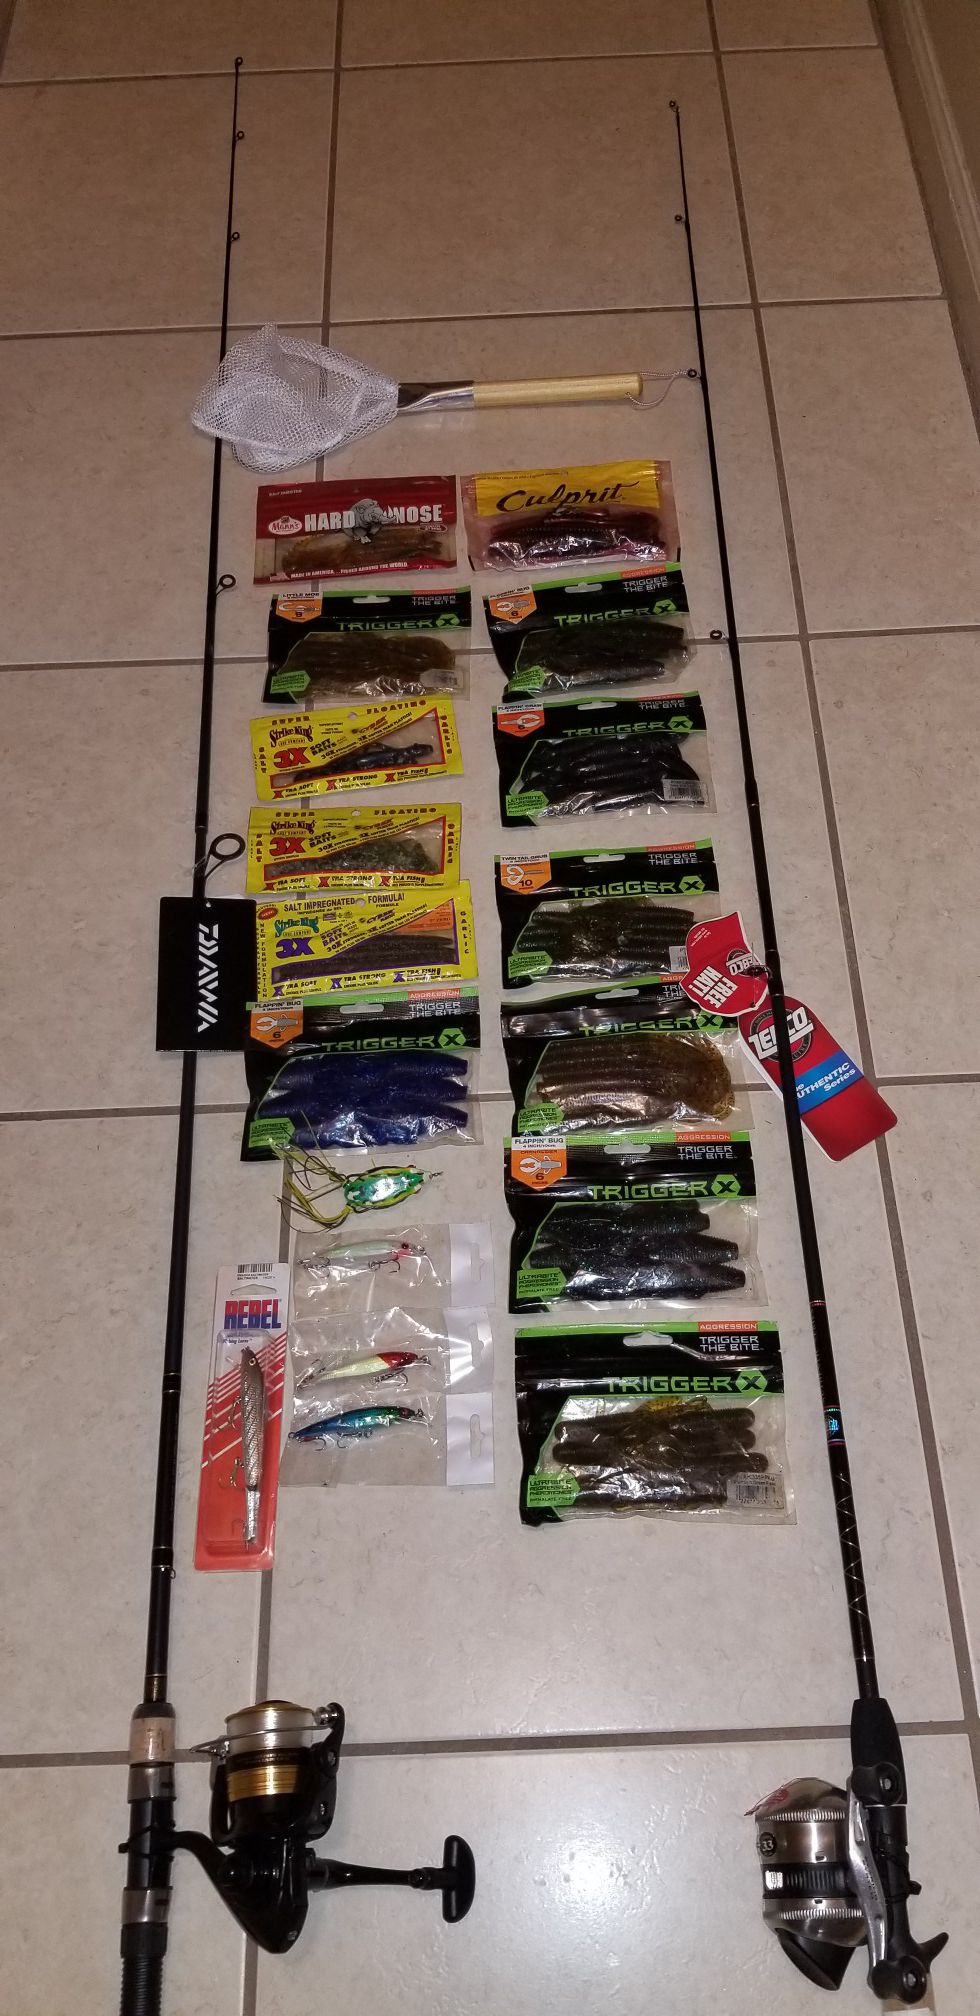 Brand new fishing rods and reels with tackle